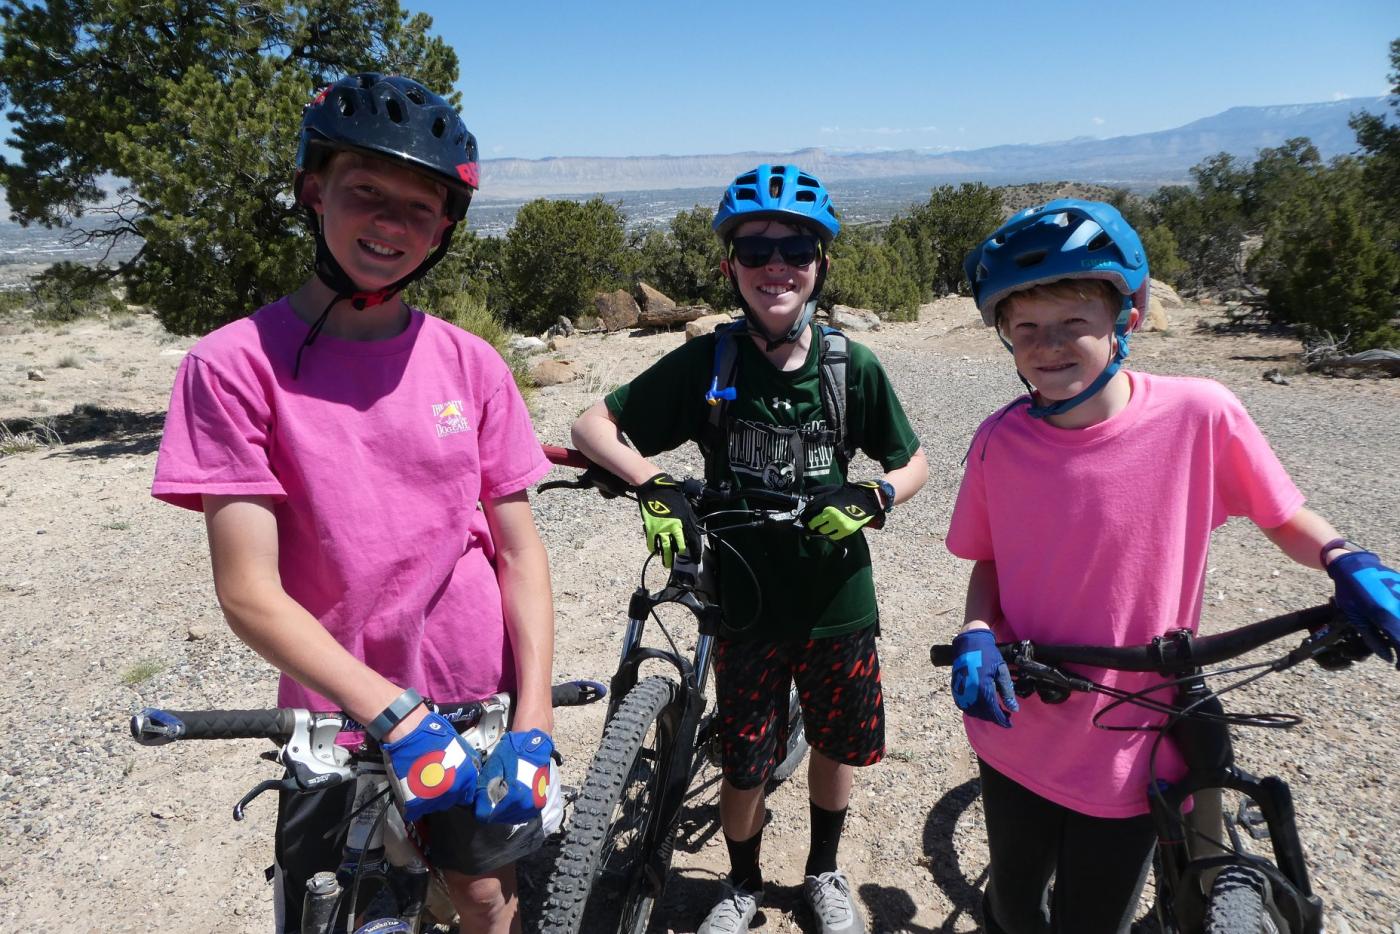 Three middle school age mountain bikers